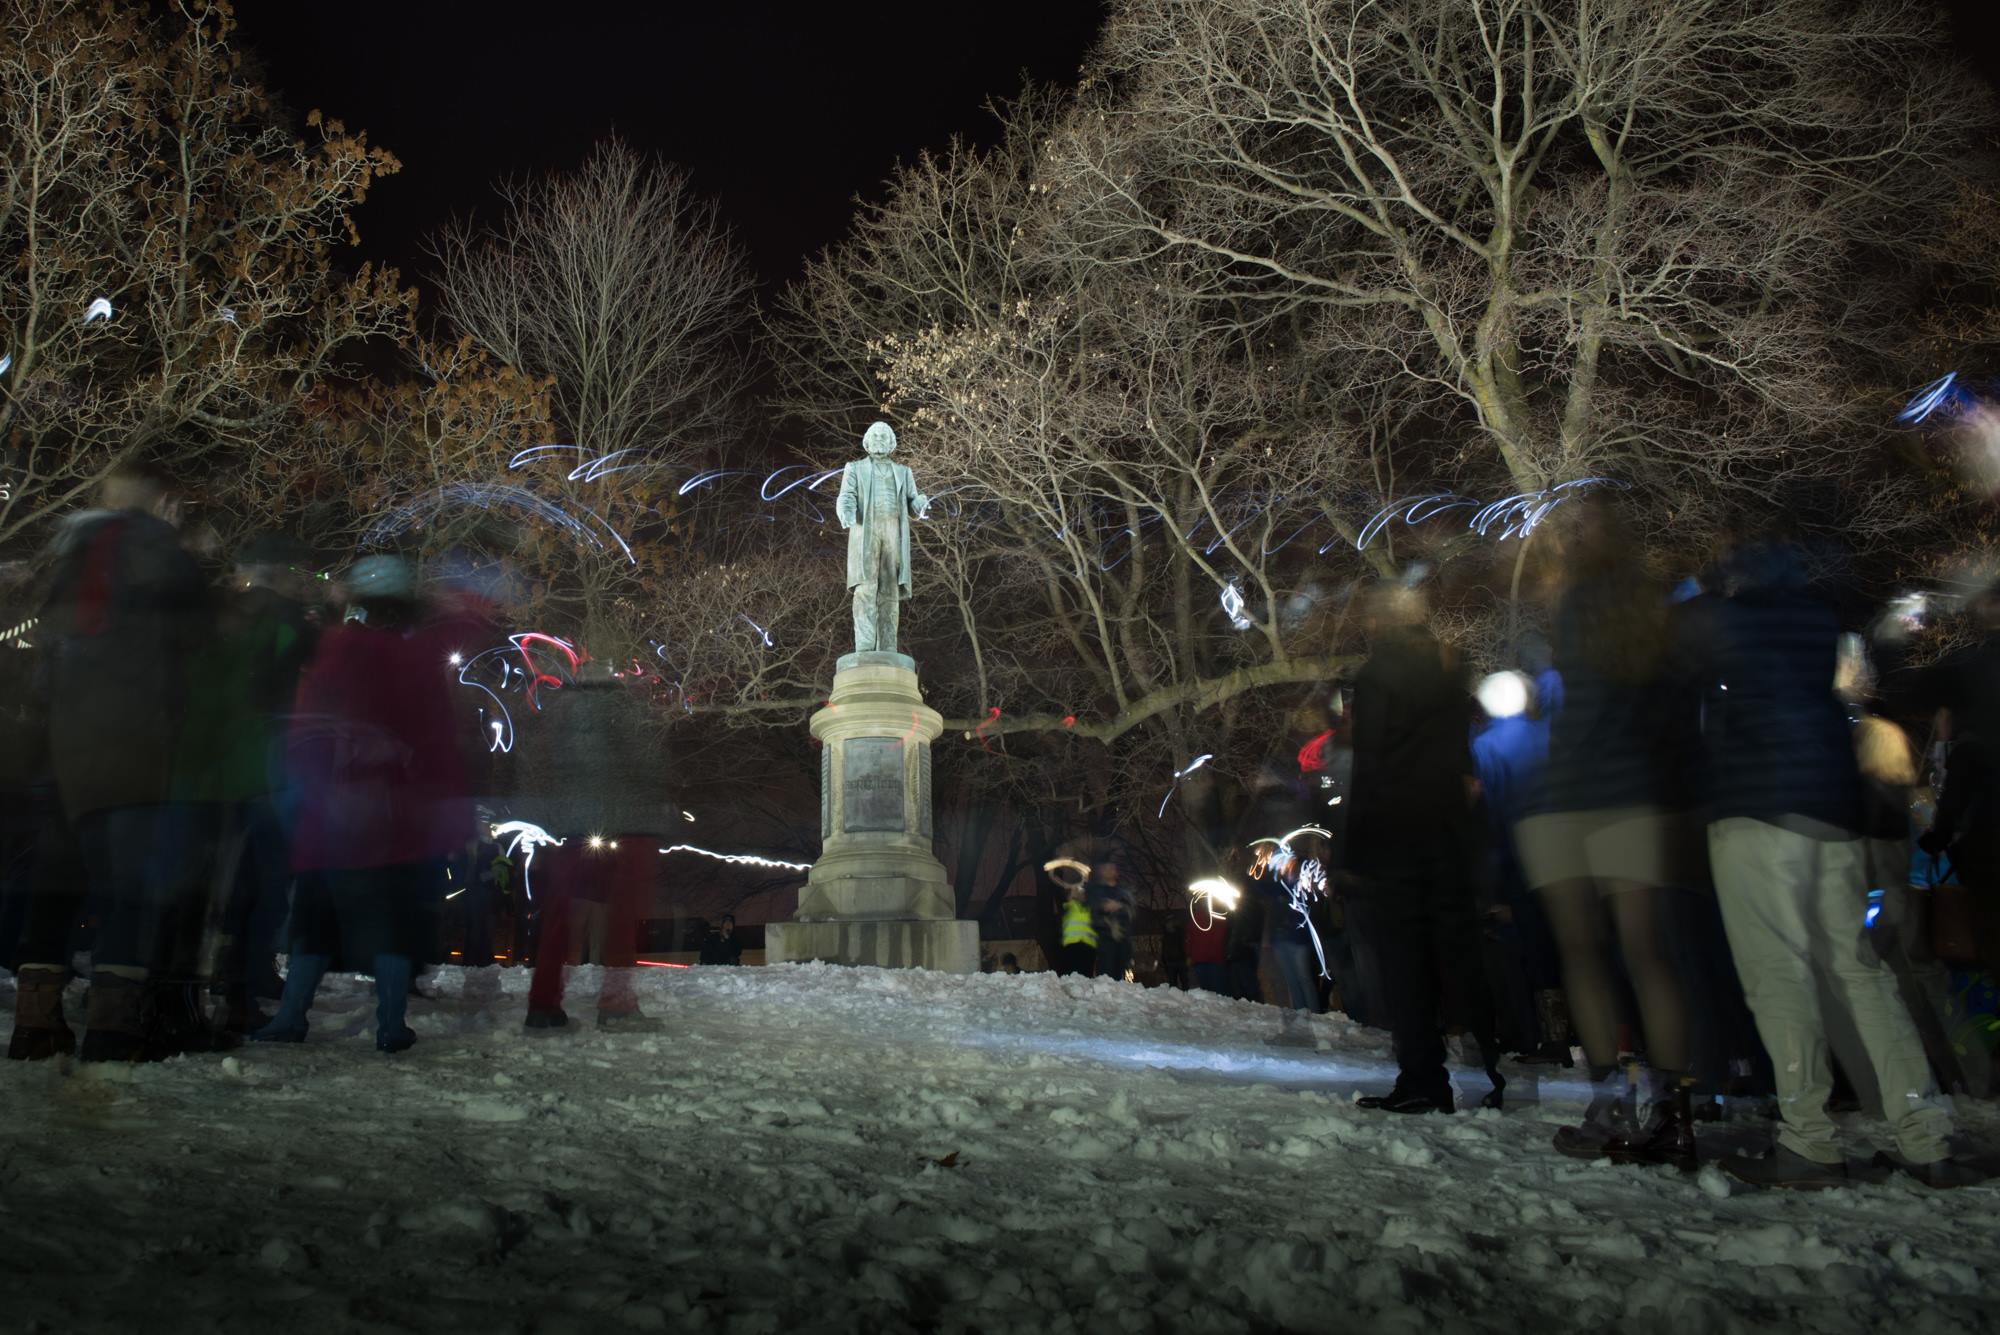 Frederick Douglass statue was subject of community "painting with light" photo